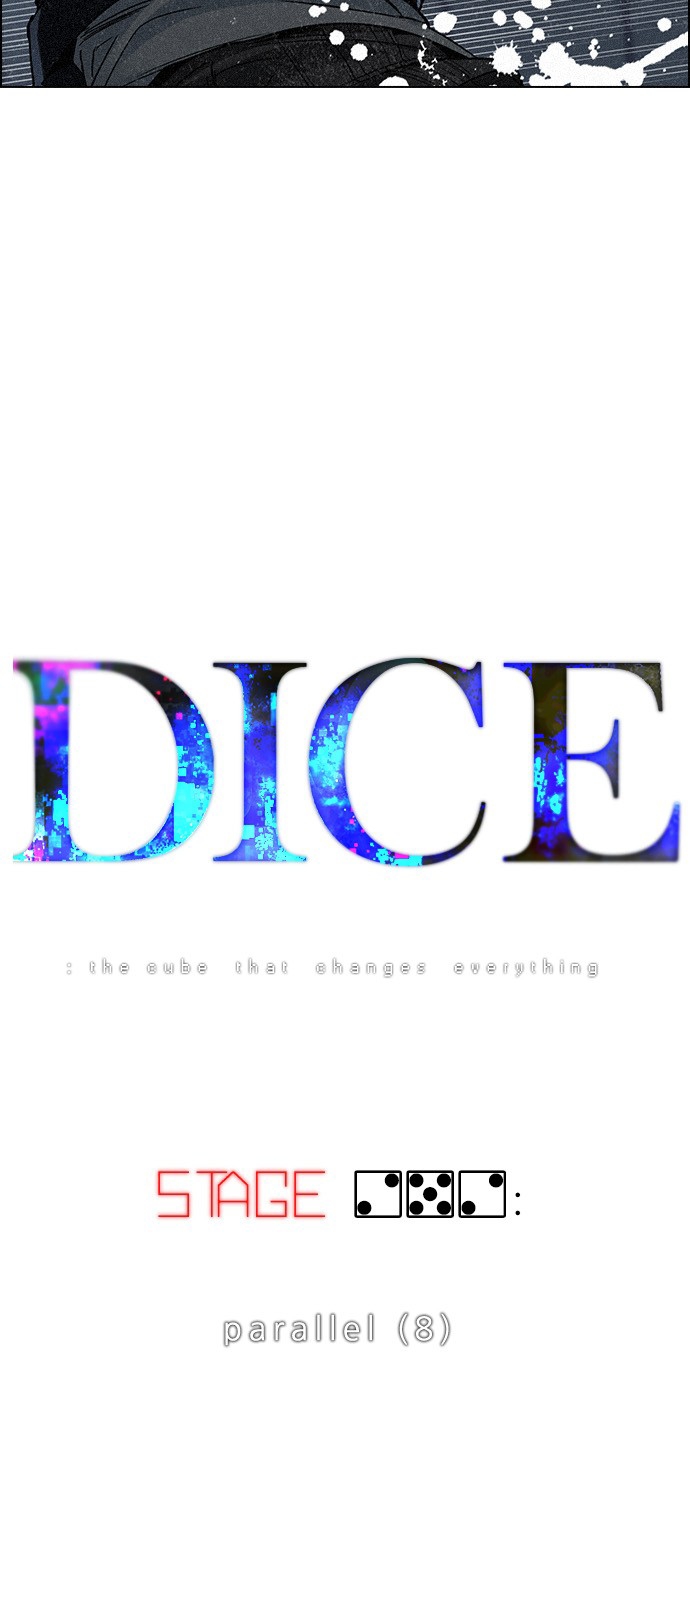 DICE: The Cube that Changes Everything Ch. 252 Parallel (8)